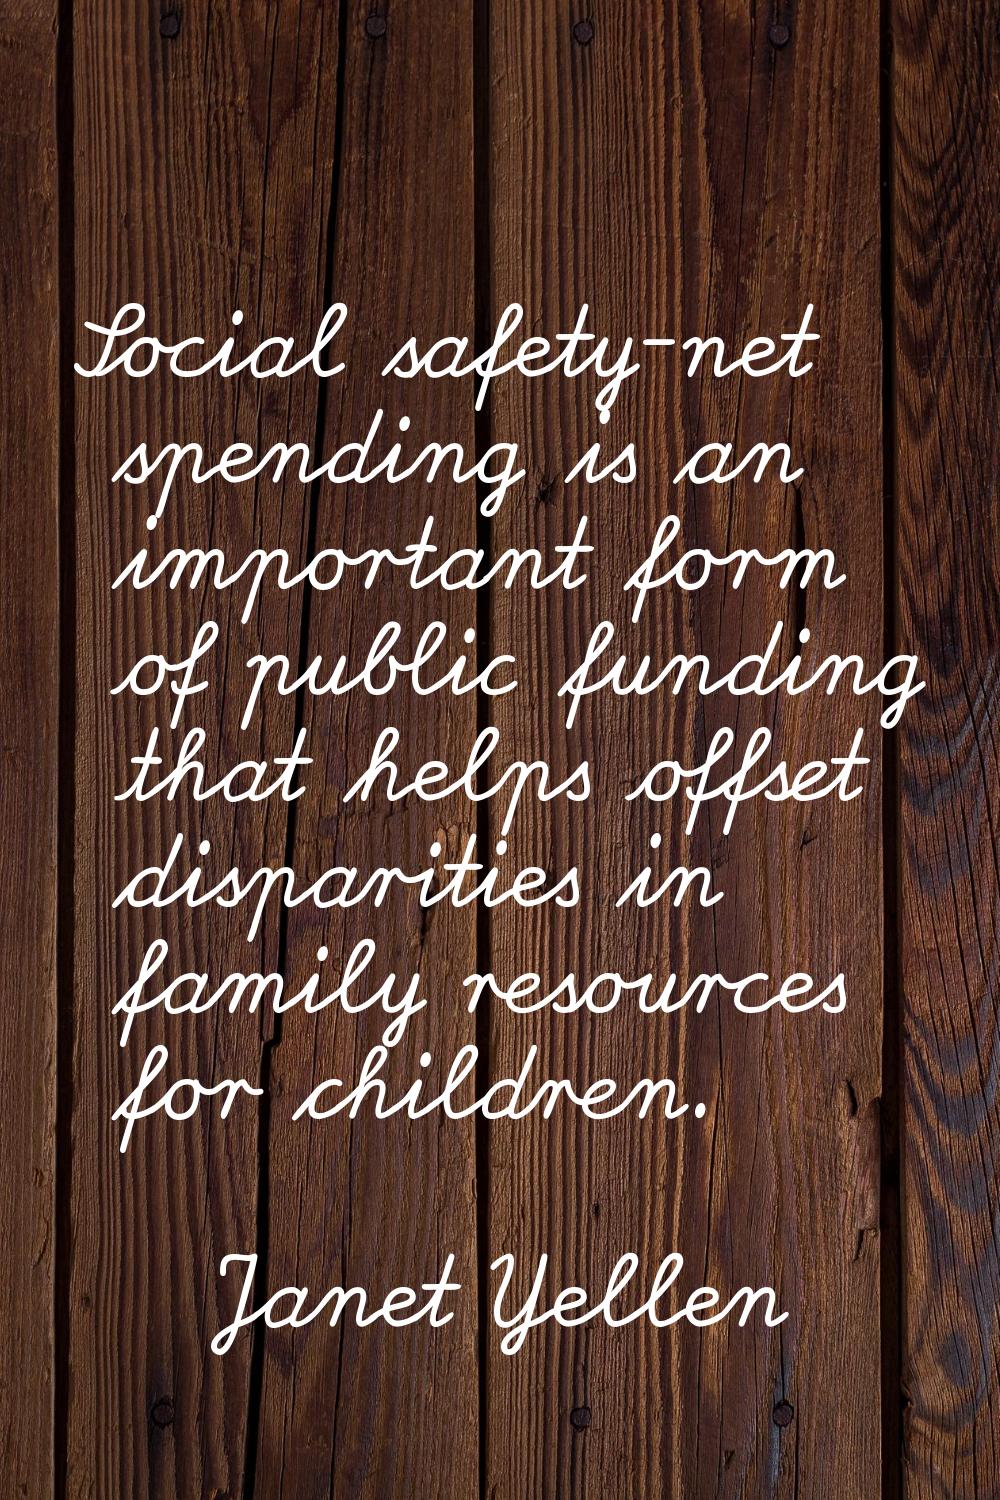 Social safety-net spending is an important form of public funding that helps offset disparities in 